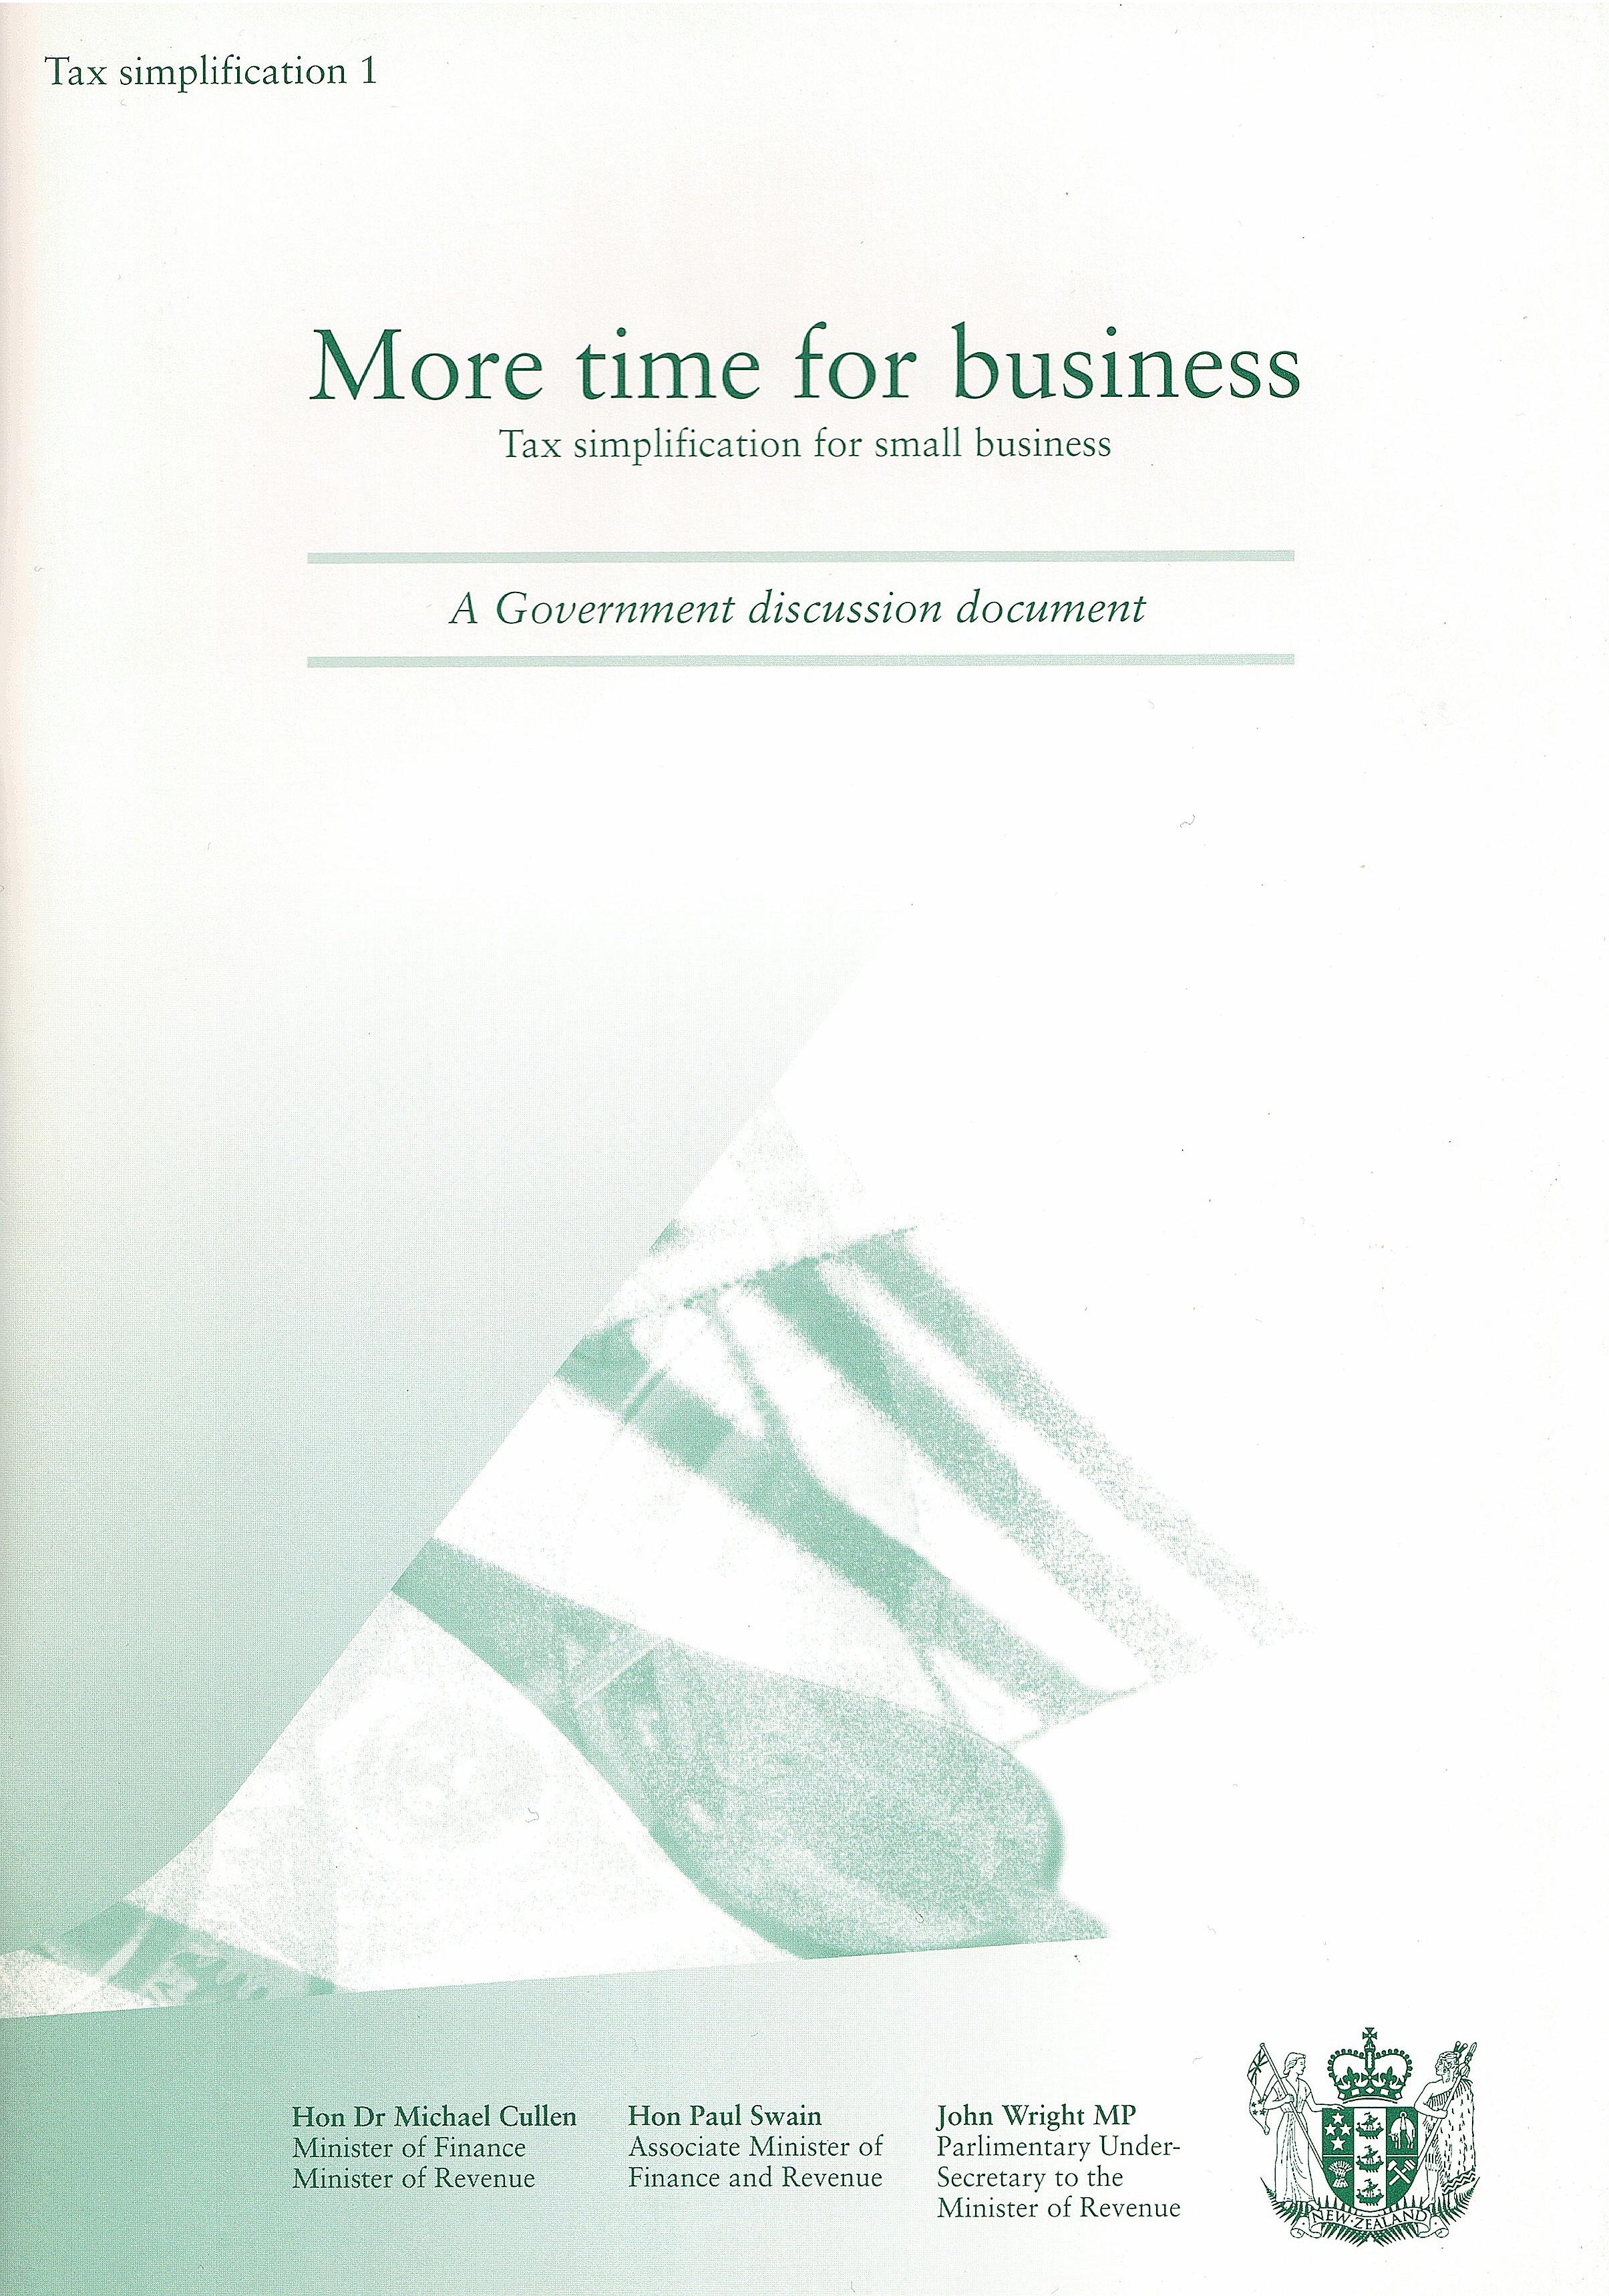 Publication cover image. Title = More time for business - tax simplification for small business: a Government discussion document. May 2001.